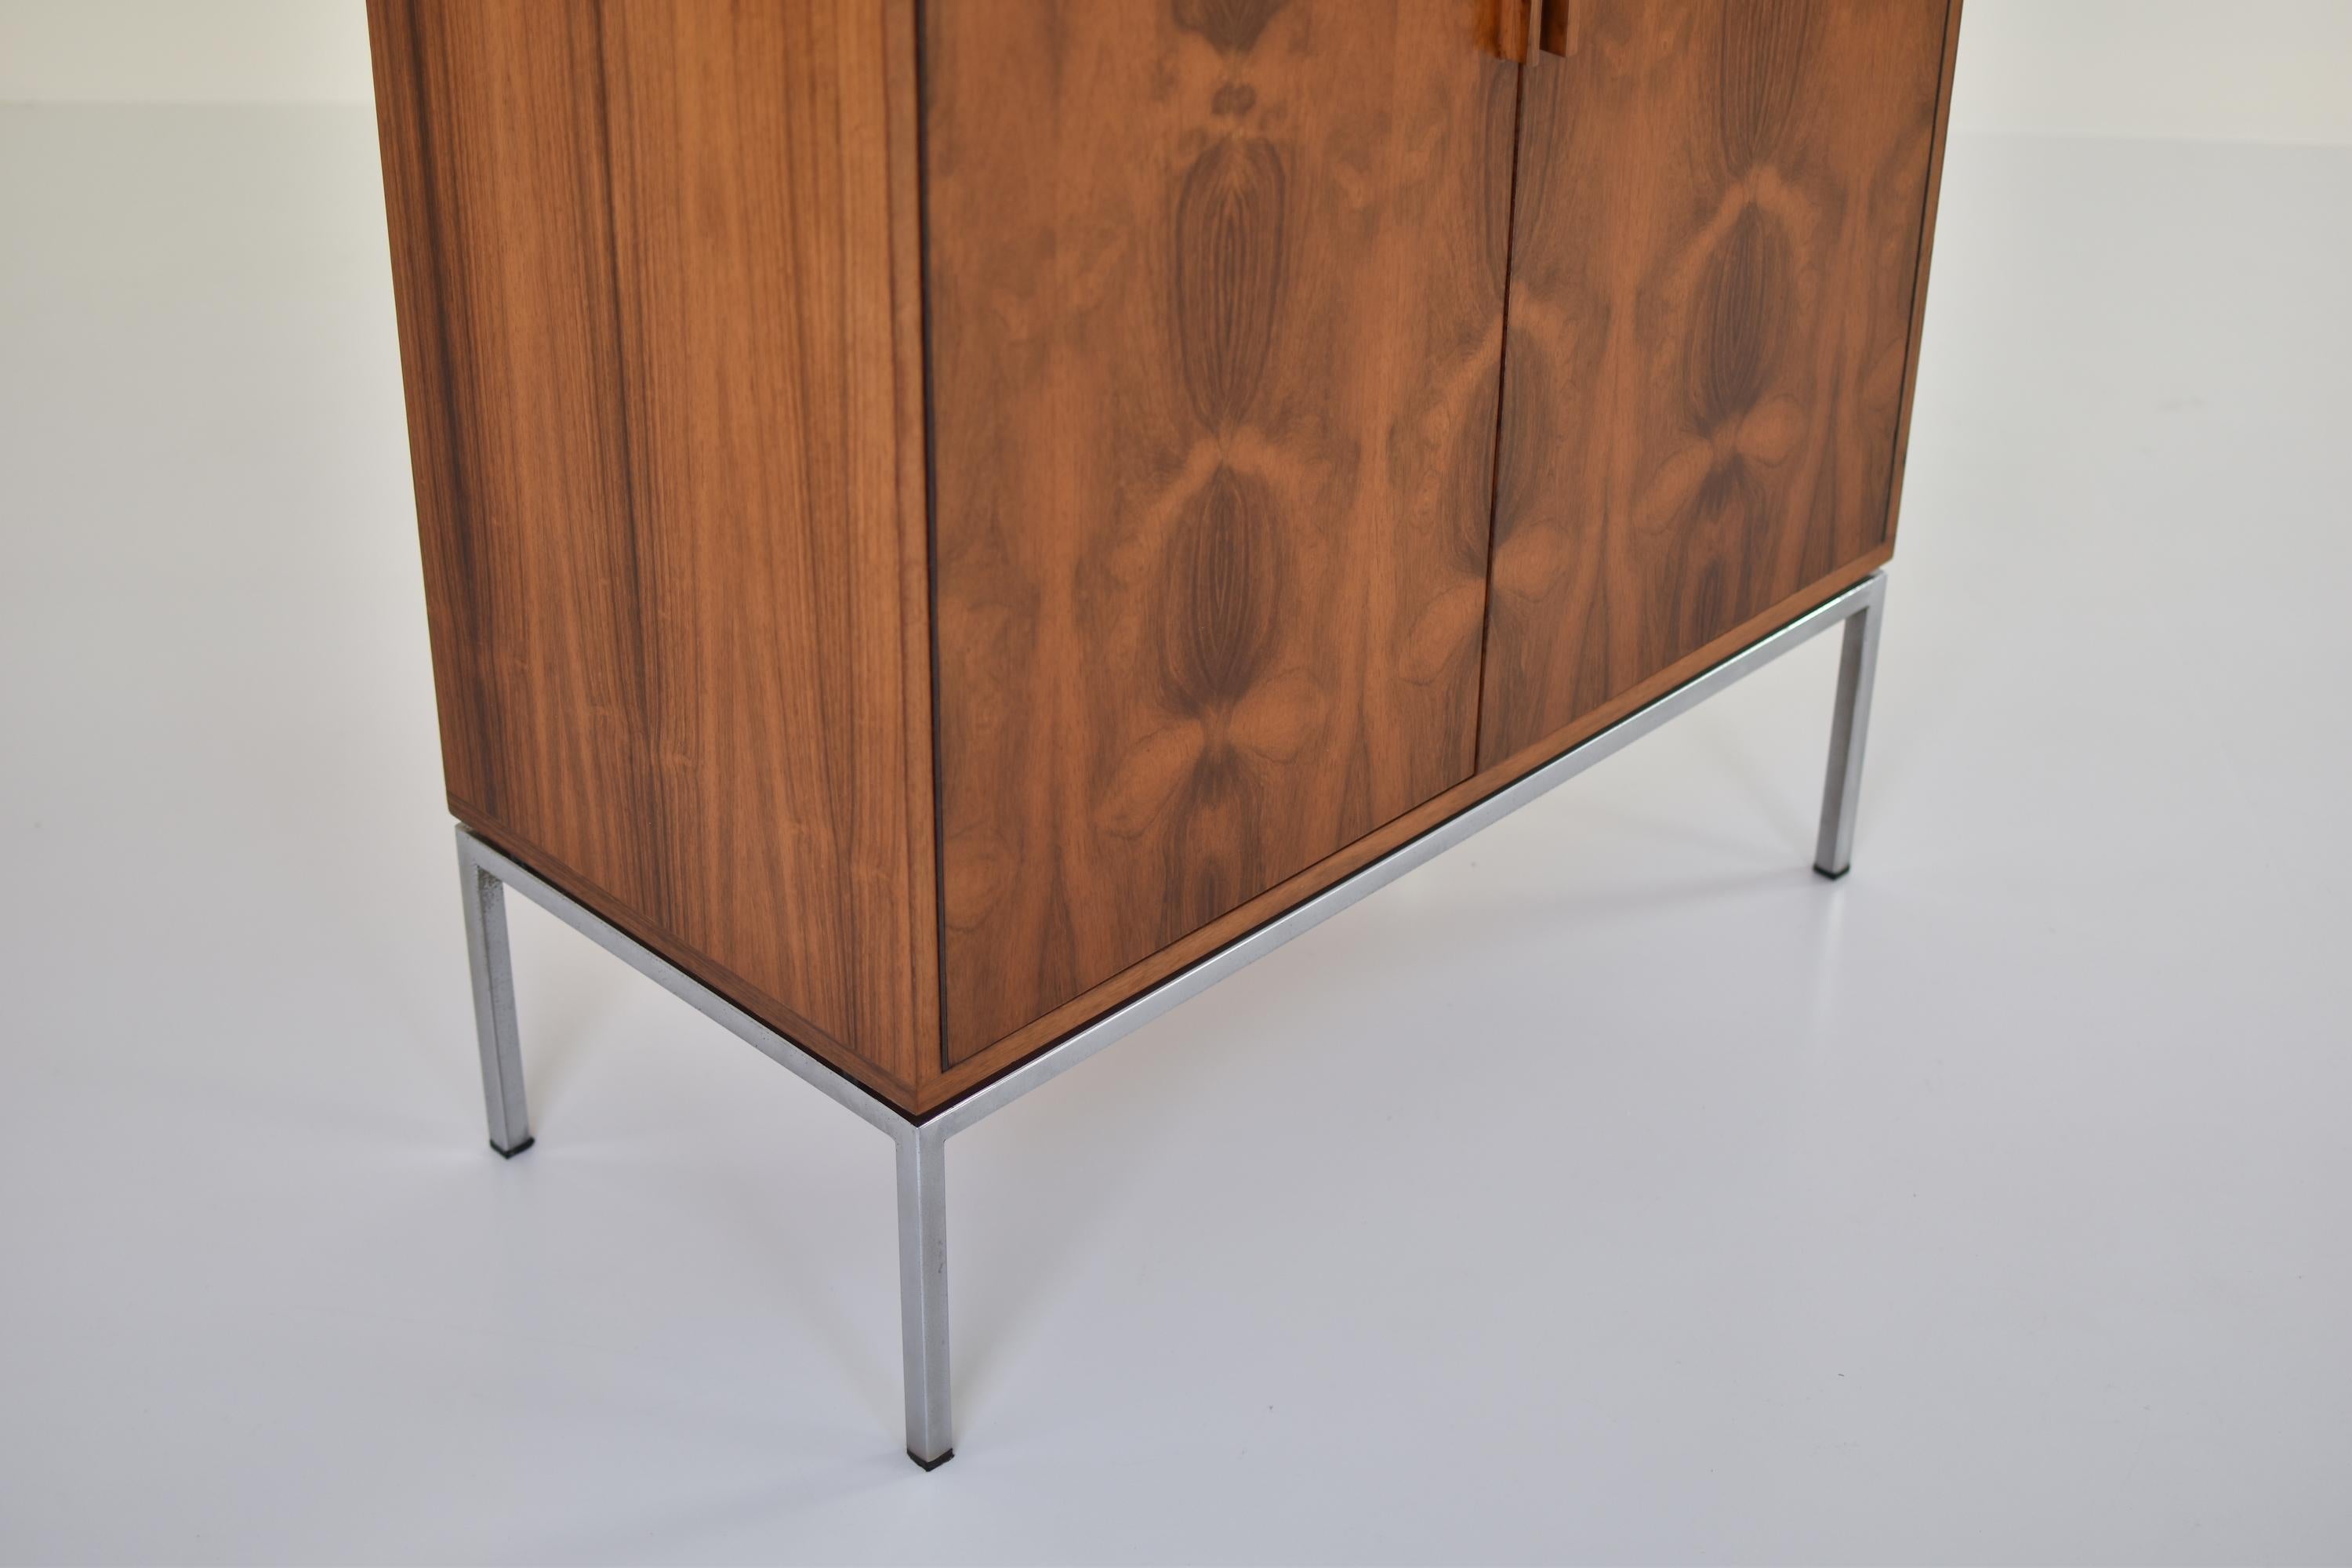 Steel Rosewood Highboard from the 1960s